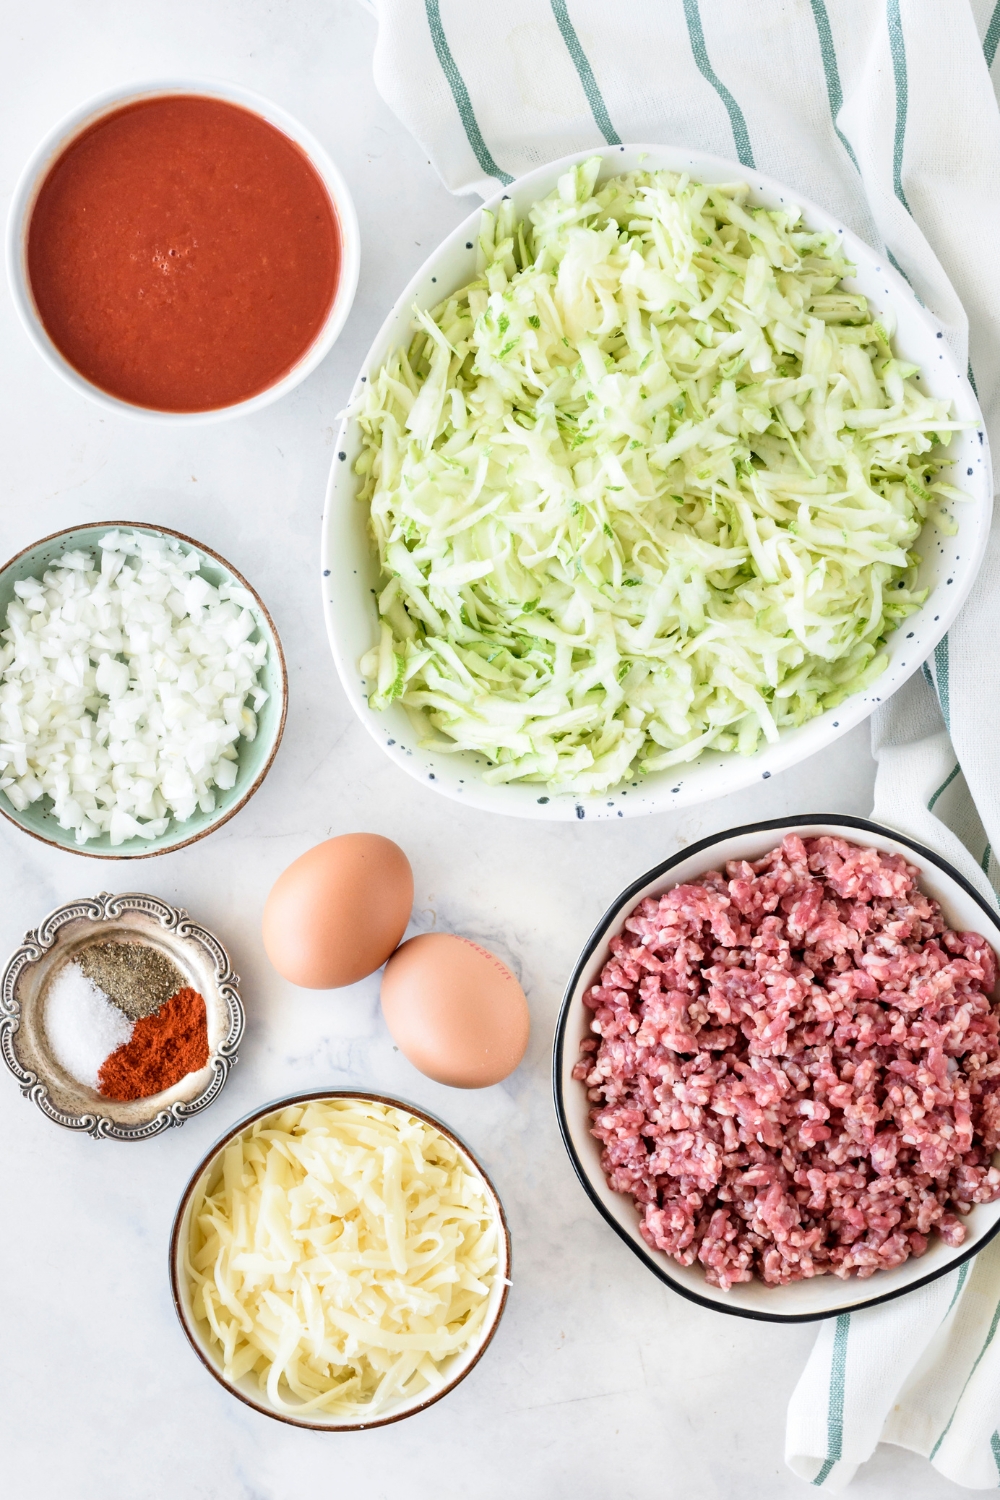 An assortment of ingredients including bowls of grated zucchini, raw ground beef, tomato sauce, diced onion, shredded cheese, spices, and two eggs.